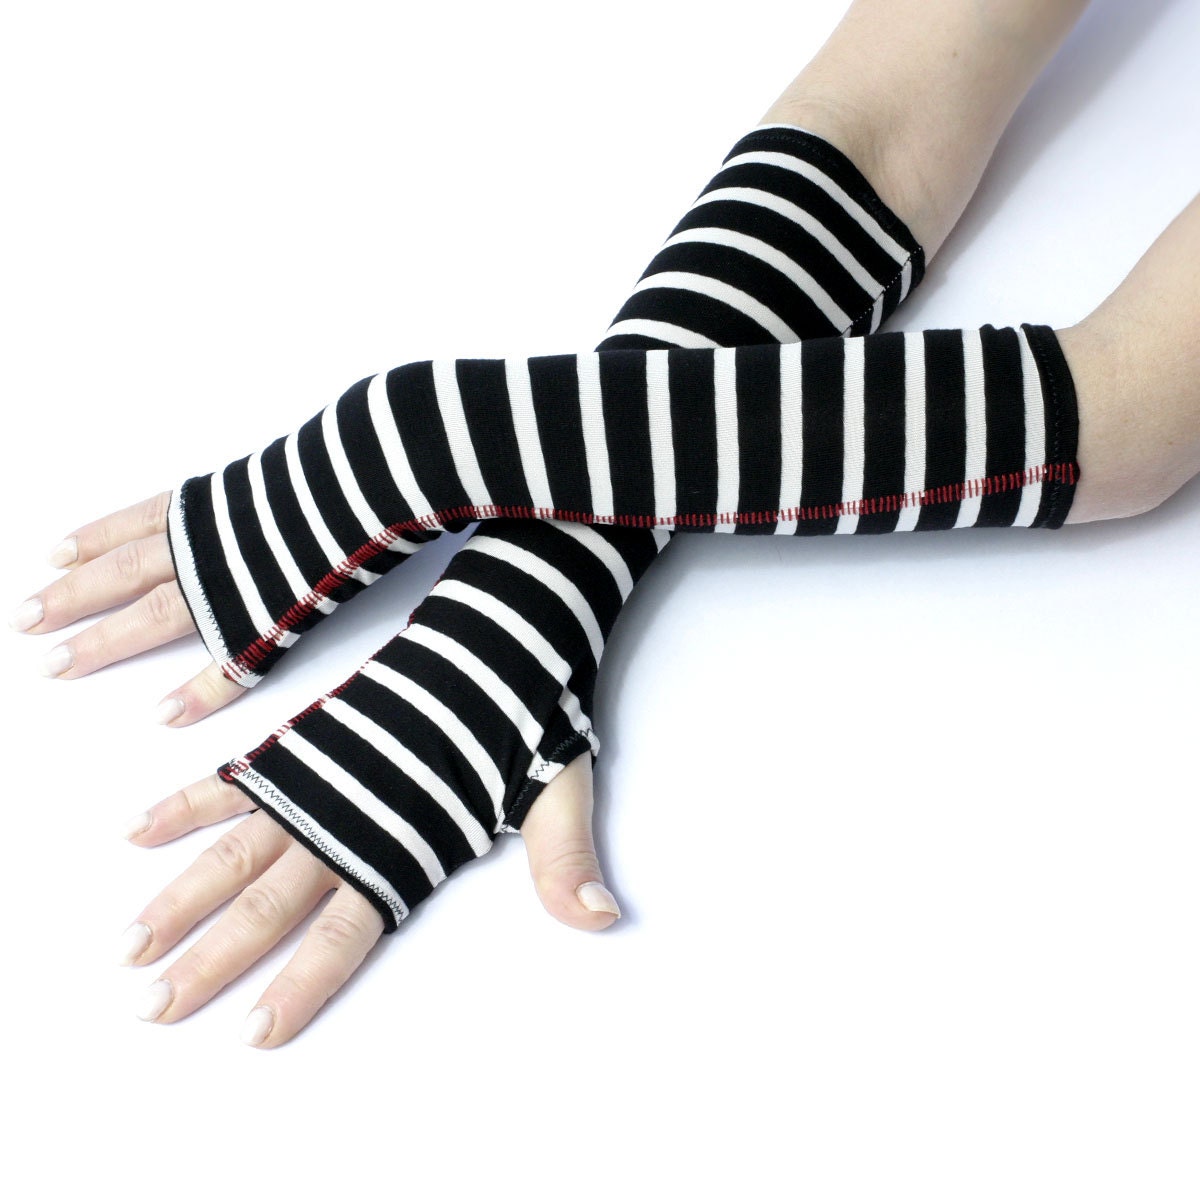 Cozy Black And White Striped Fingerless Gloves By Wearmeup